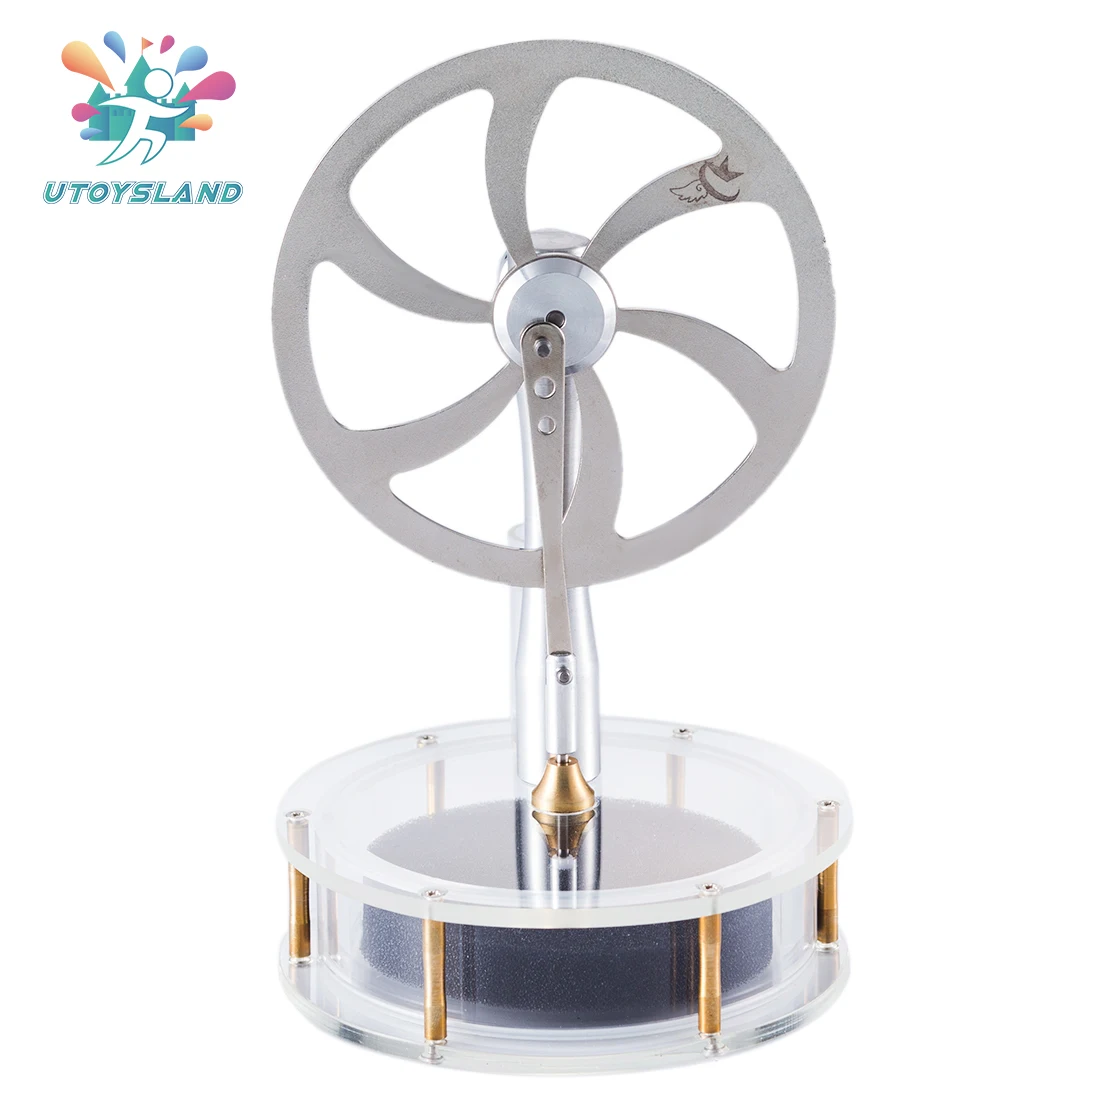 

UTOYSLAND High Quality Diy Metal Low Temperature Stirling Engine Stem Steam Model Set Early Learning Model Kit Toys For Children